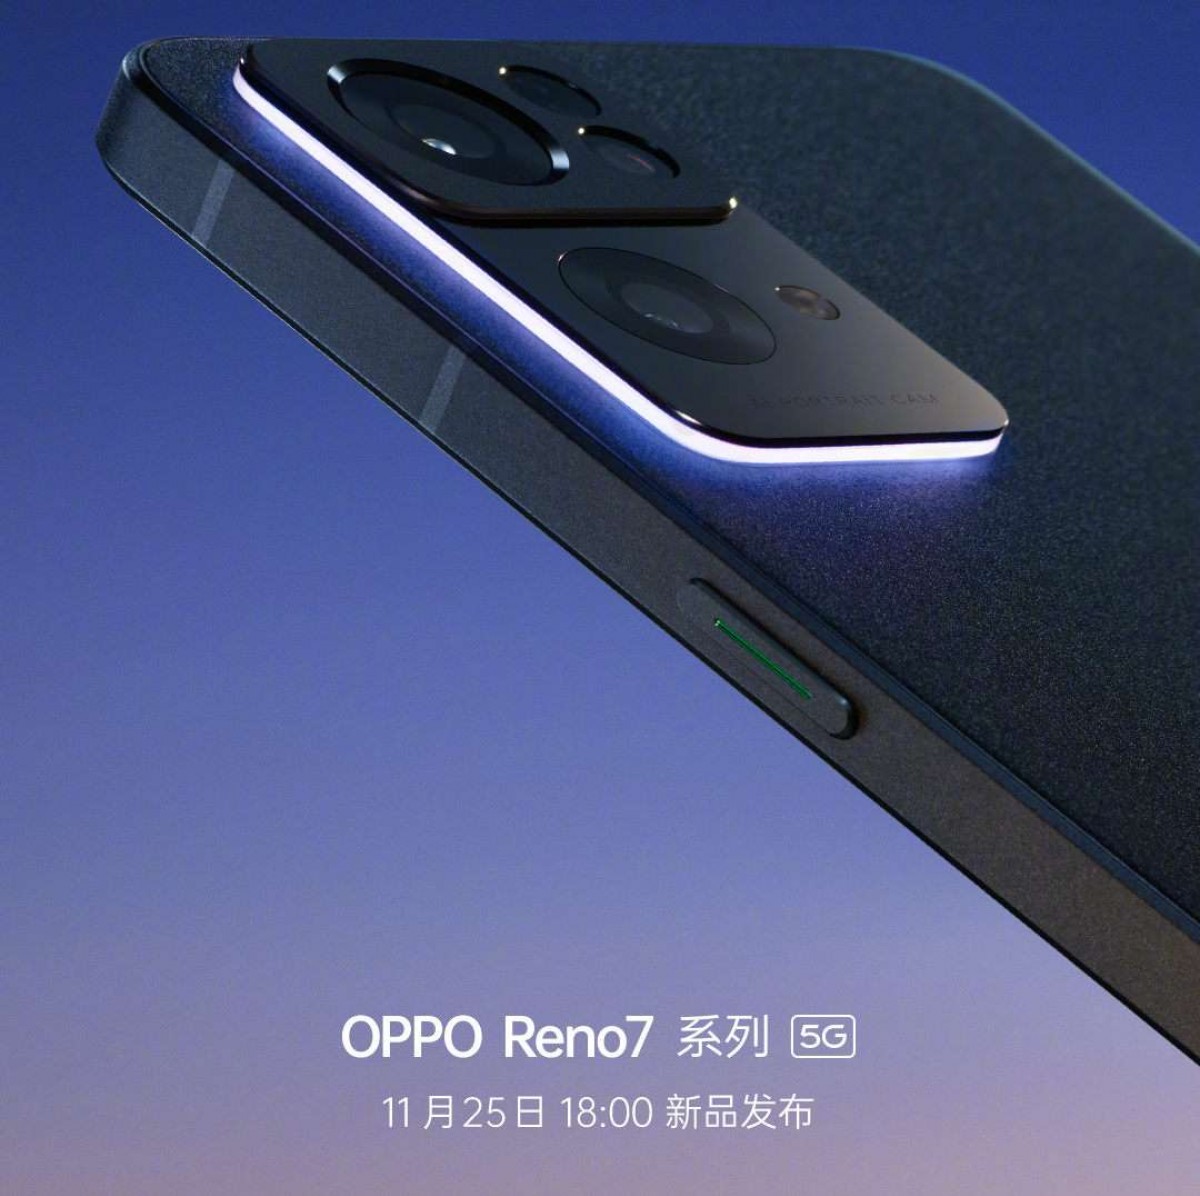 Oppo Reno7 up on JD.com, available November 25, specs and renders are here